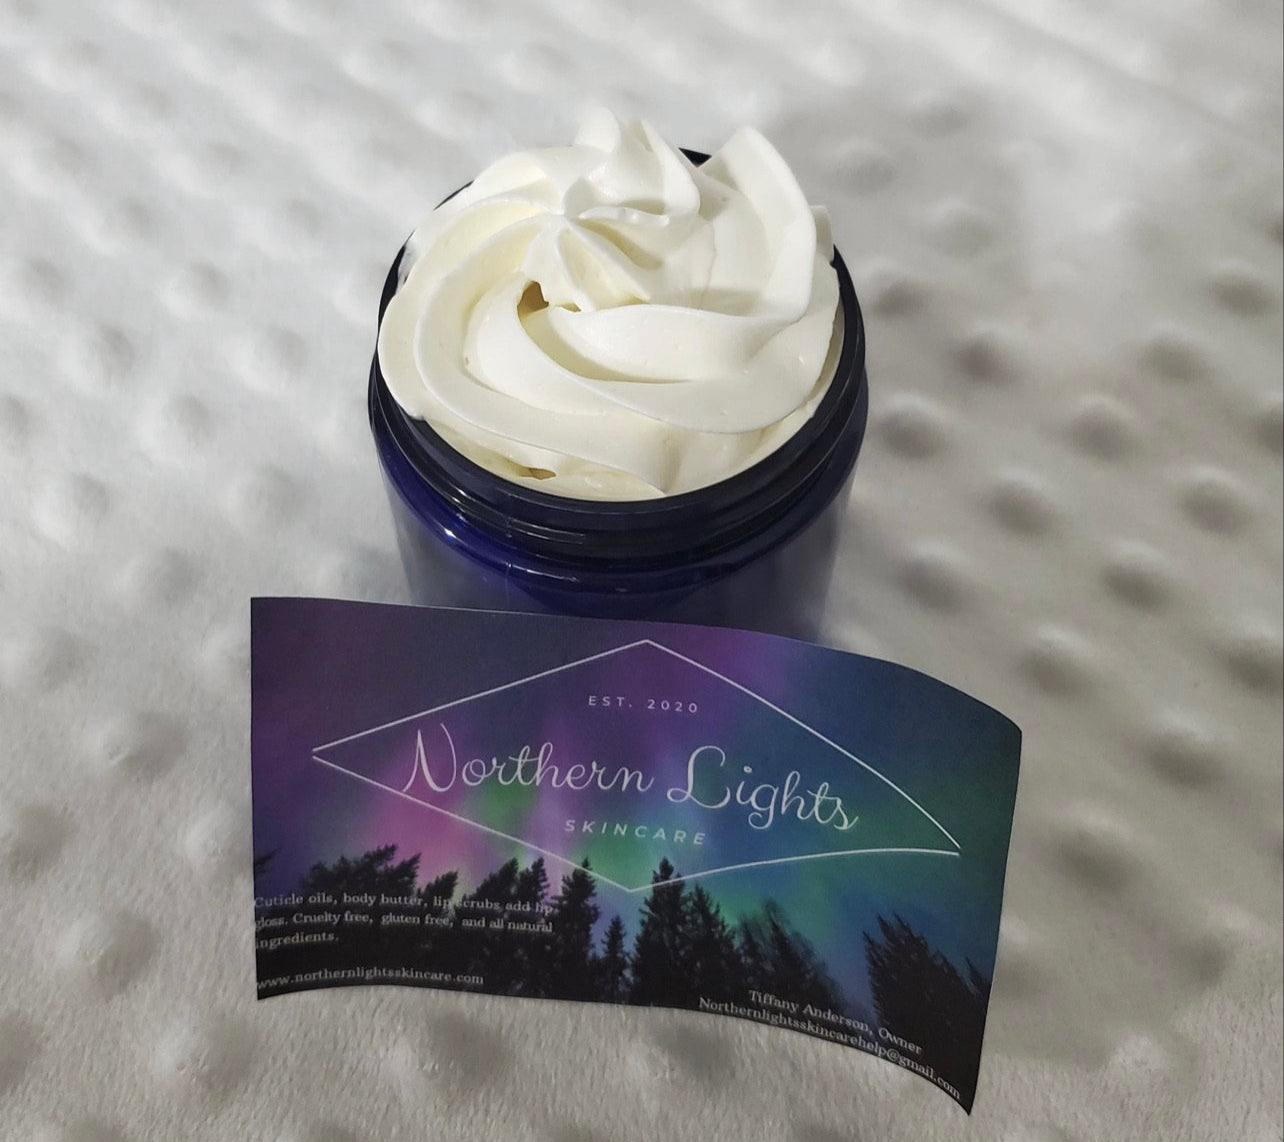 Twilight Forest Whipped Body Butter